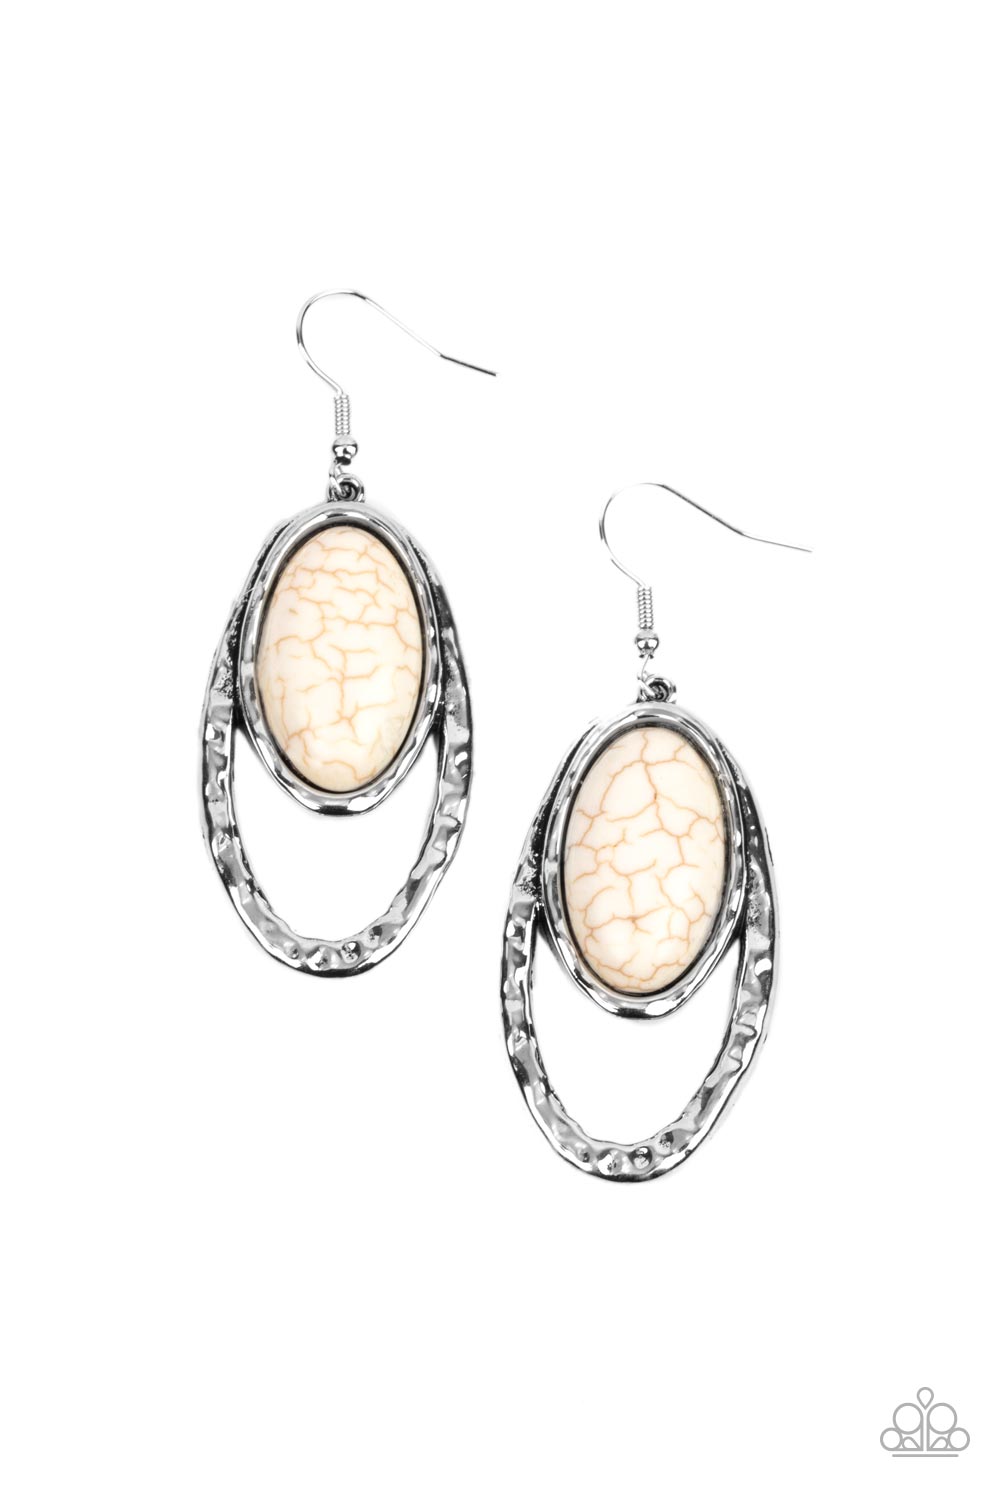 Pasture Paradise White Earring - Paparazzi Accessories  An oval white stone is pressed into a hammered silver fitting that attaches to the top of a hammered silver oval frame, creating a rustic lure. Earring attaches to a standard fishhook fitting.  All Paparazzi Accessories are lead free and nickel free!  Sold as one pair of earrings.